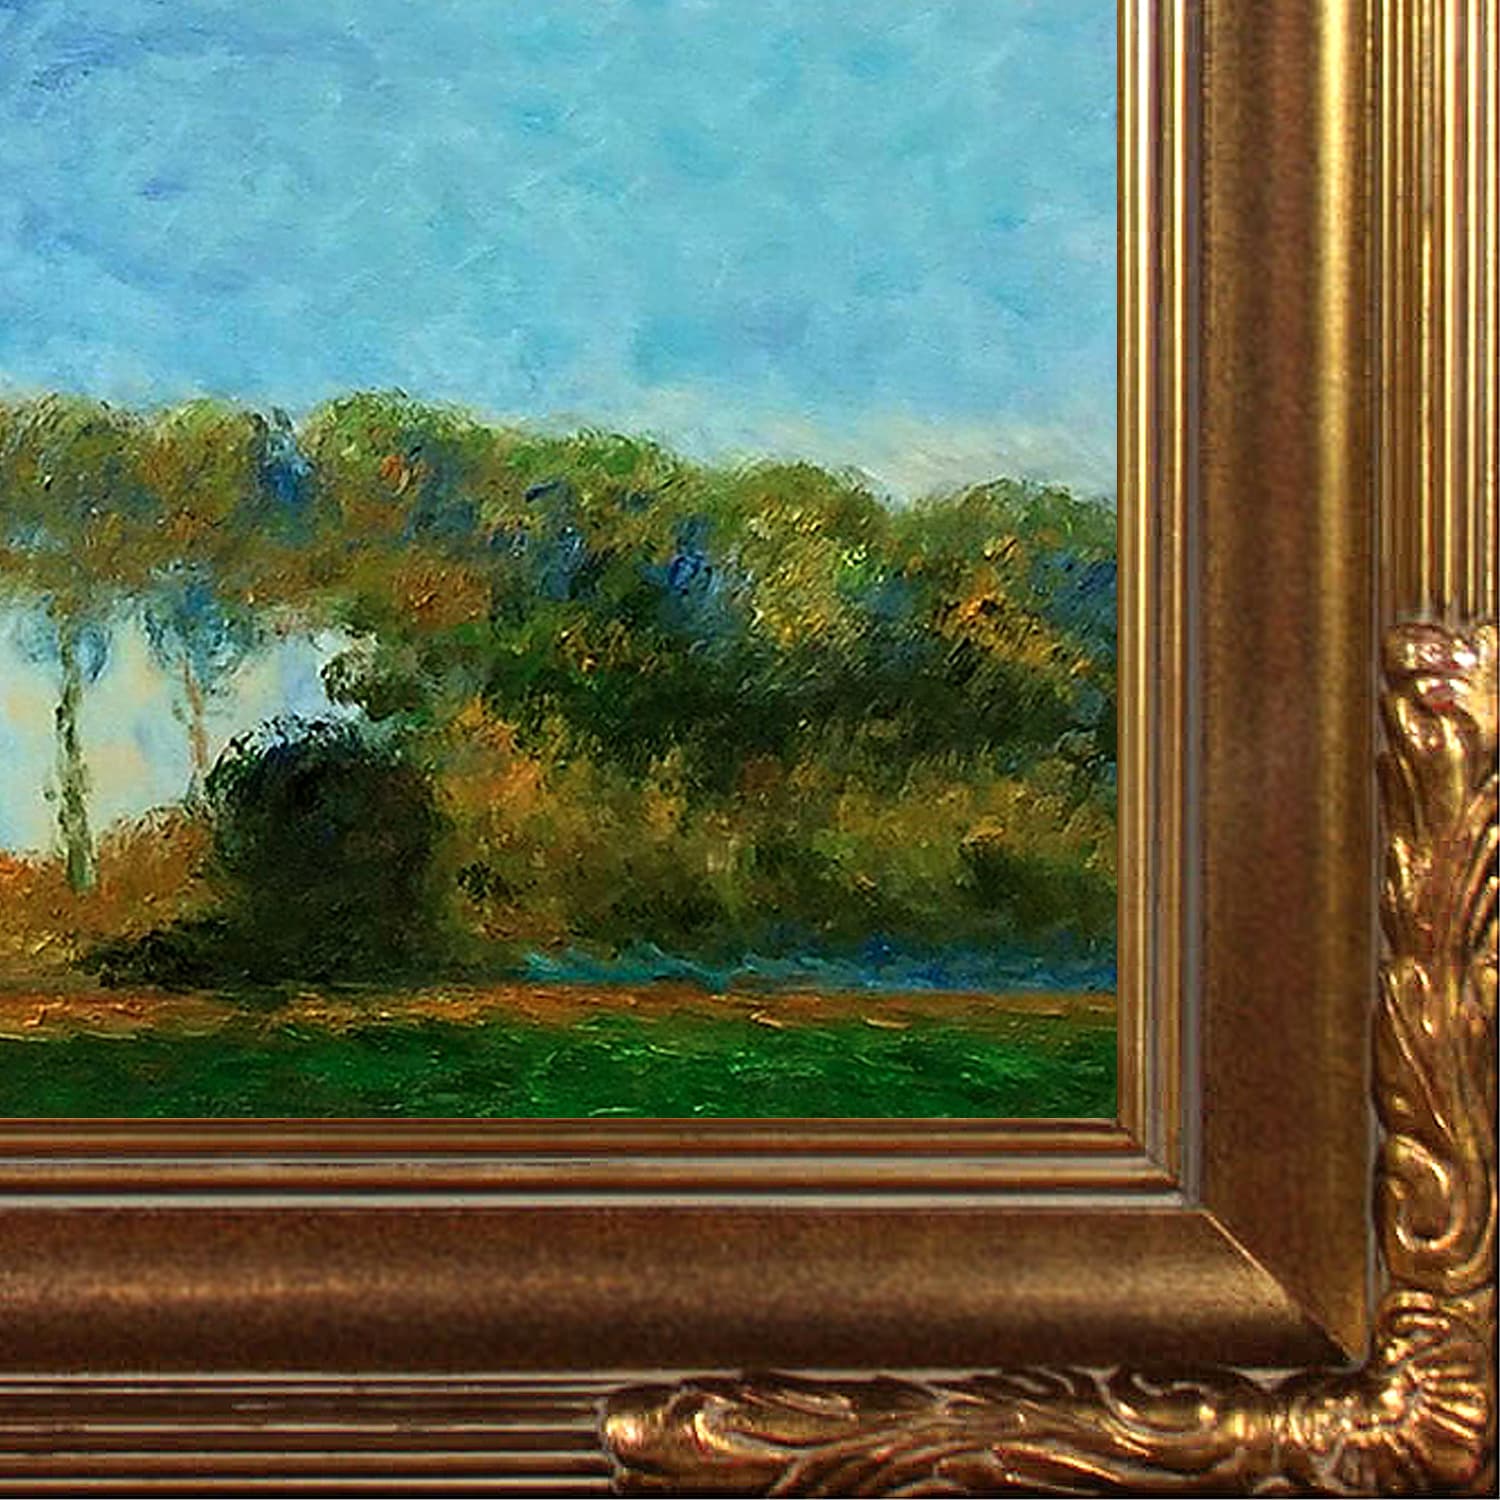 Seen from The Marsh with Florentine Gold Framed Oil Painting overstockArt Poplars on The Banks of The River Epte 31 x 27, 